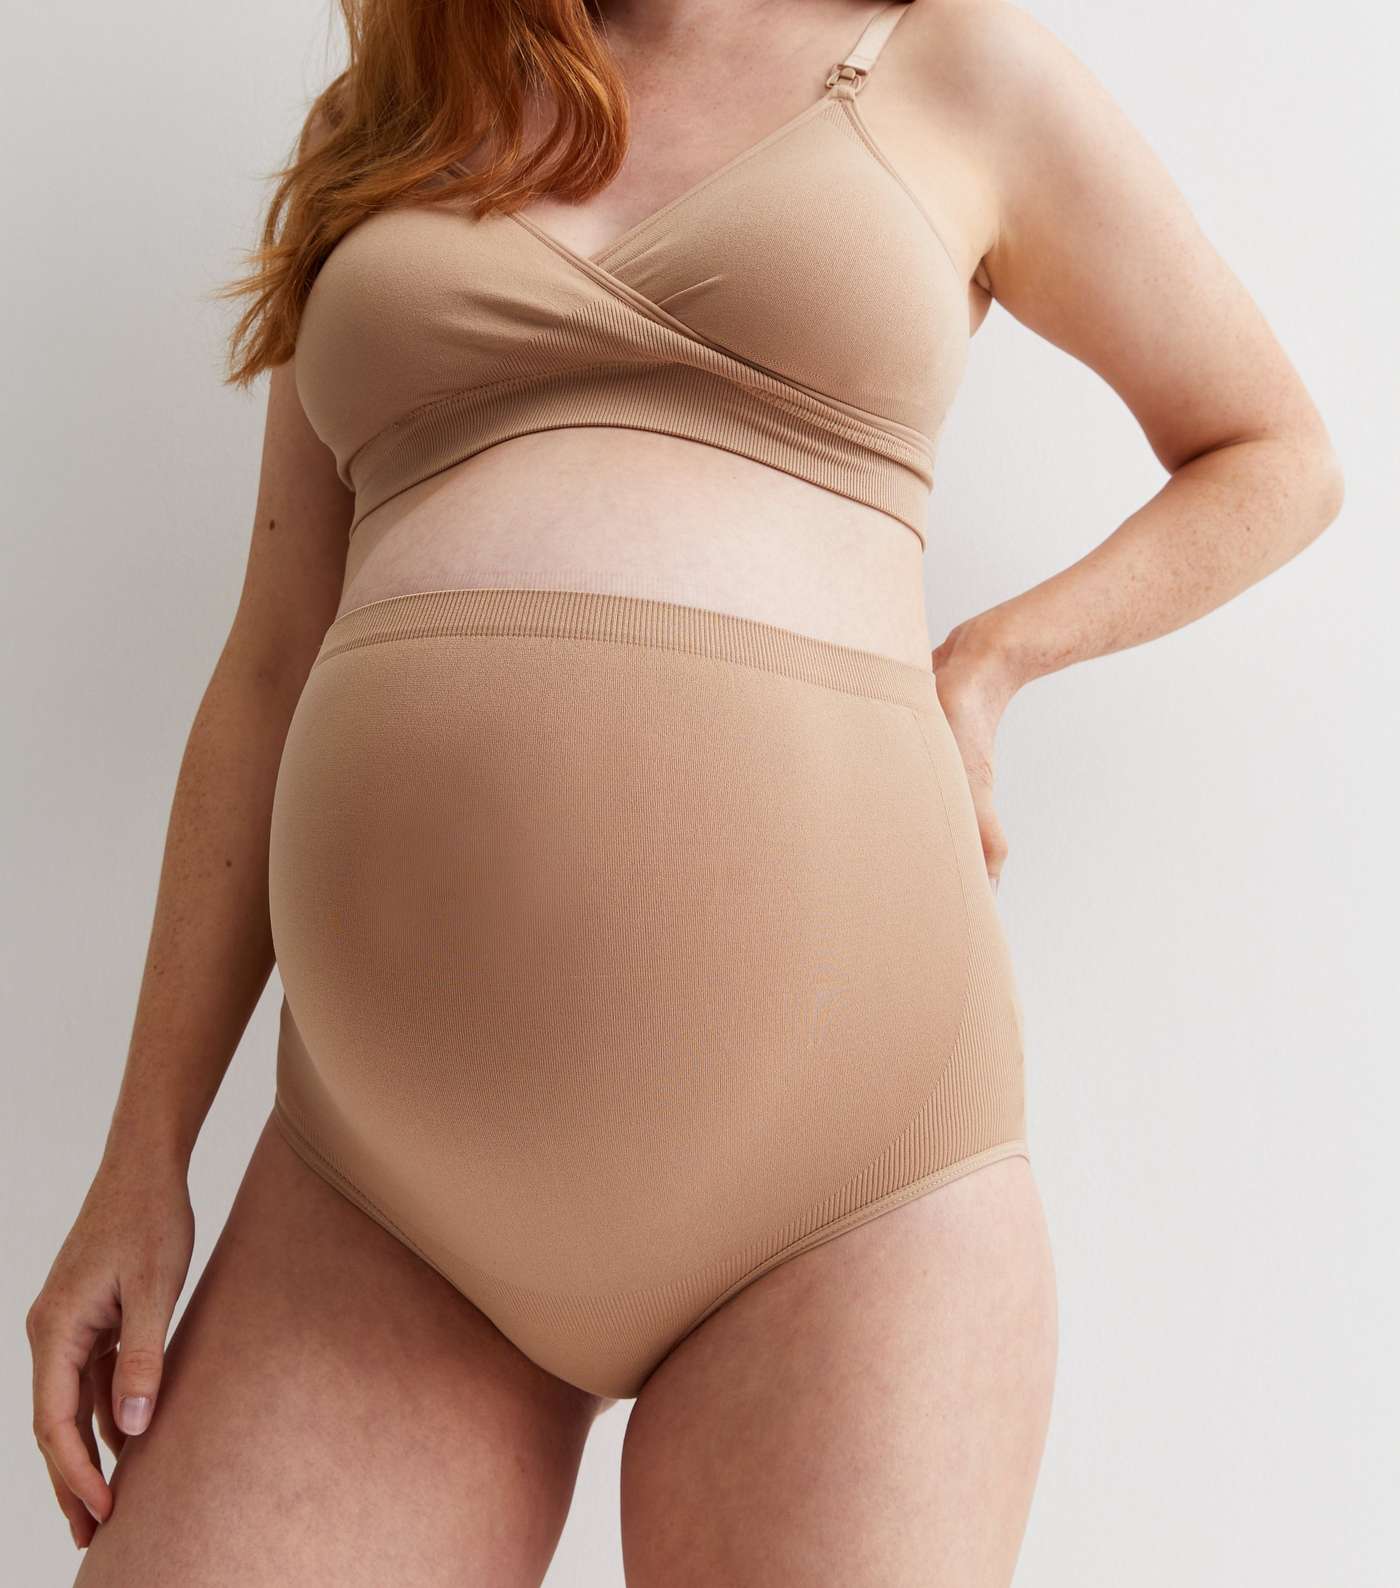 AHC Women's Seamless Maternity Underwear Over Bump Belly